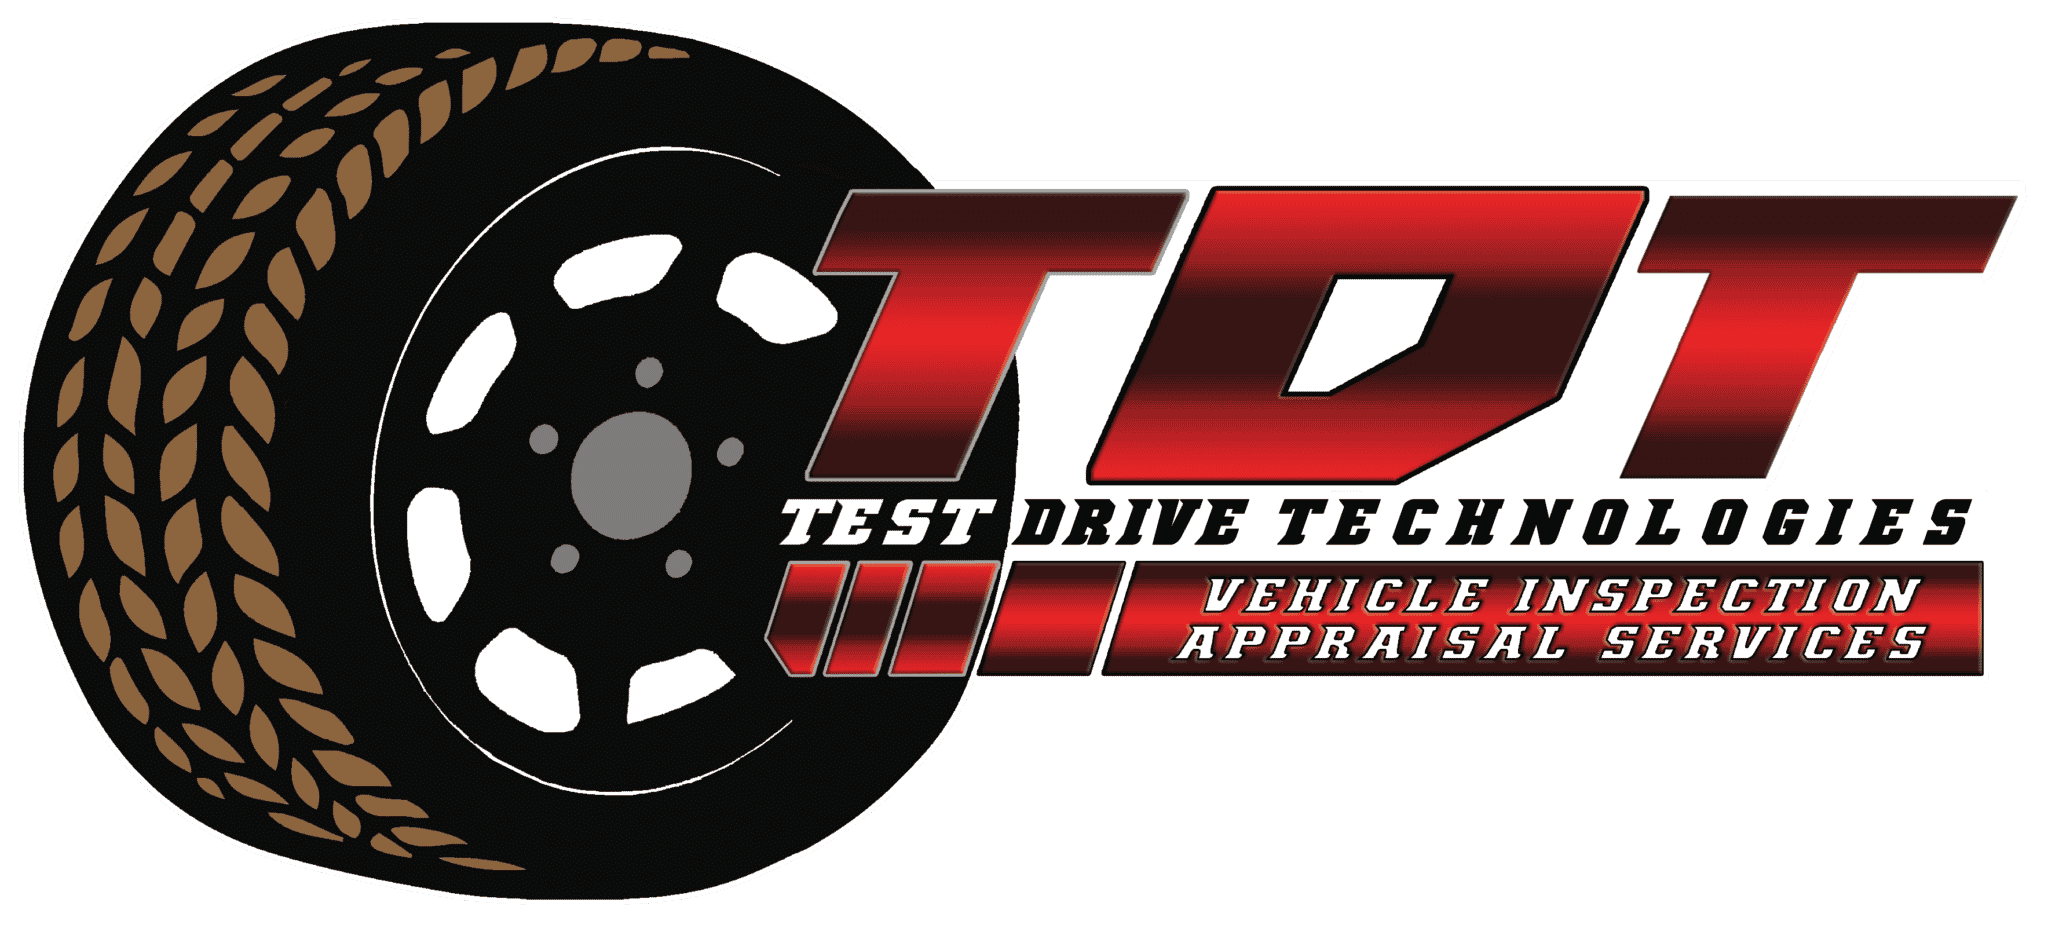 TDT Vehicle Inspection Appraisal Services of St. Louis, Missouri and Southern Illinois Covering Springfield, Kansas City, Memphis, Carbondale, Indiapolis, St. Charles, Jackson and Cape Girardeau